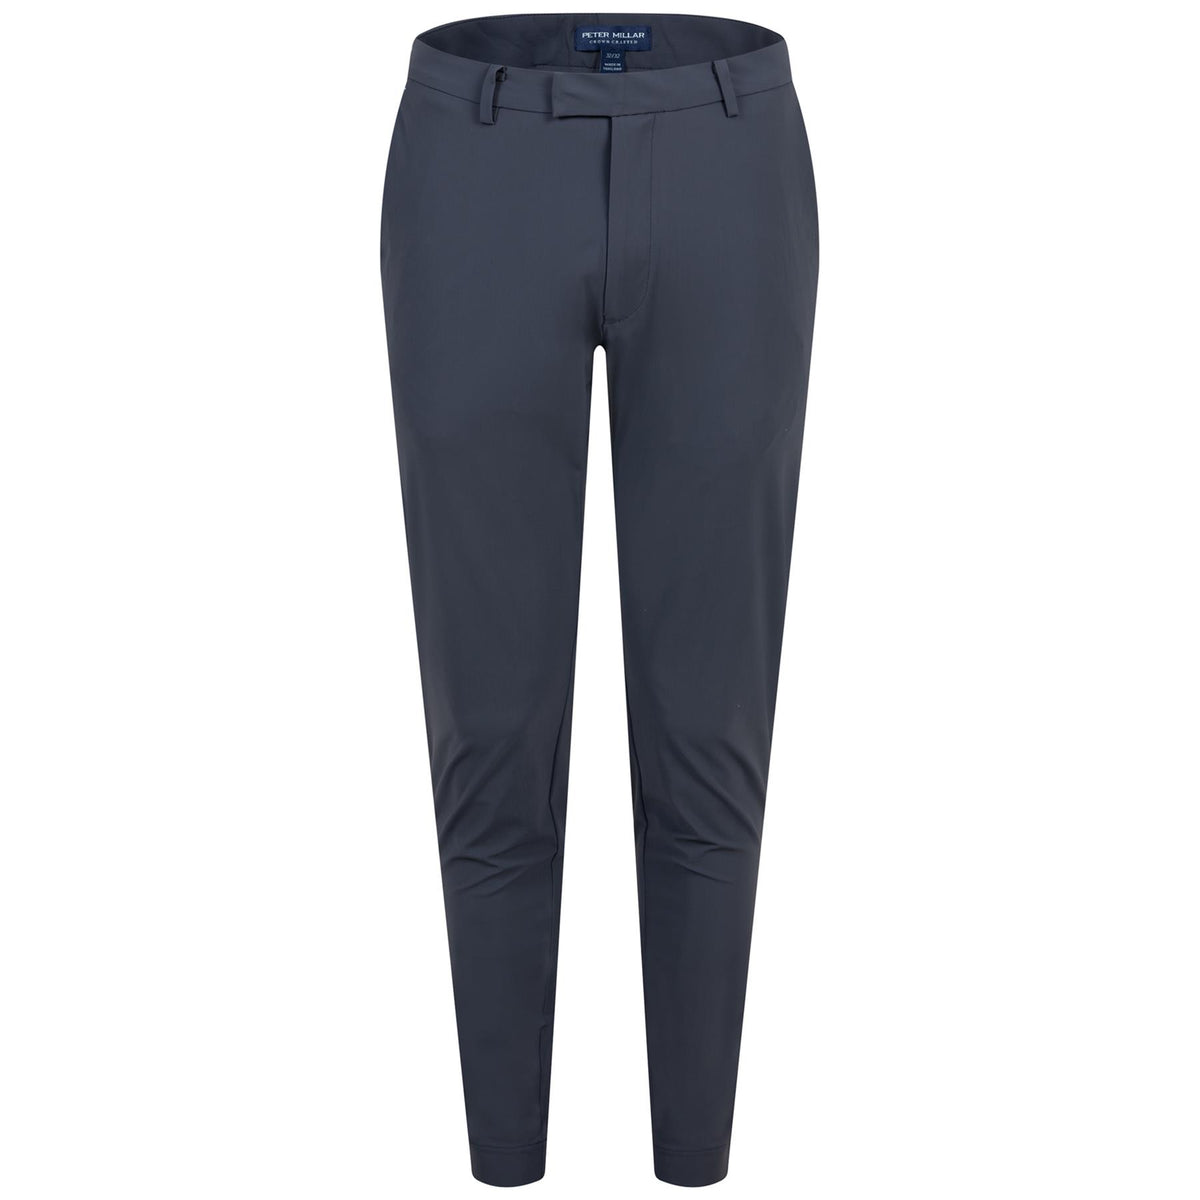 Now @ Golf Locker: Peter Millar Crown Crafted Blade Performance Ankle Golf  Pants - Tour Fit - ON